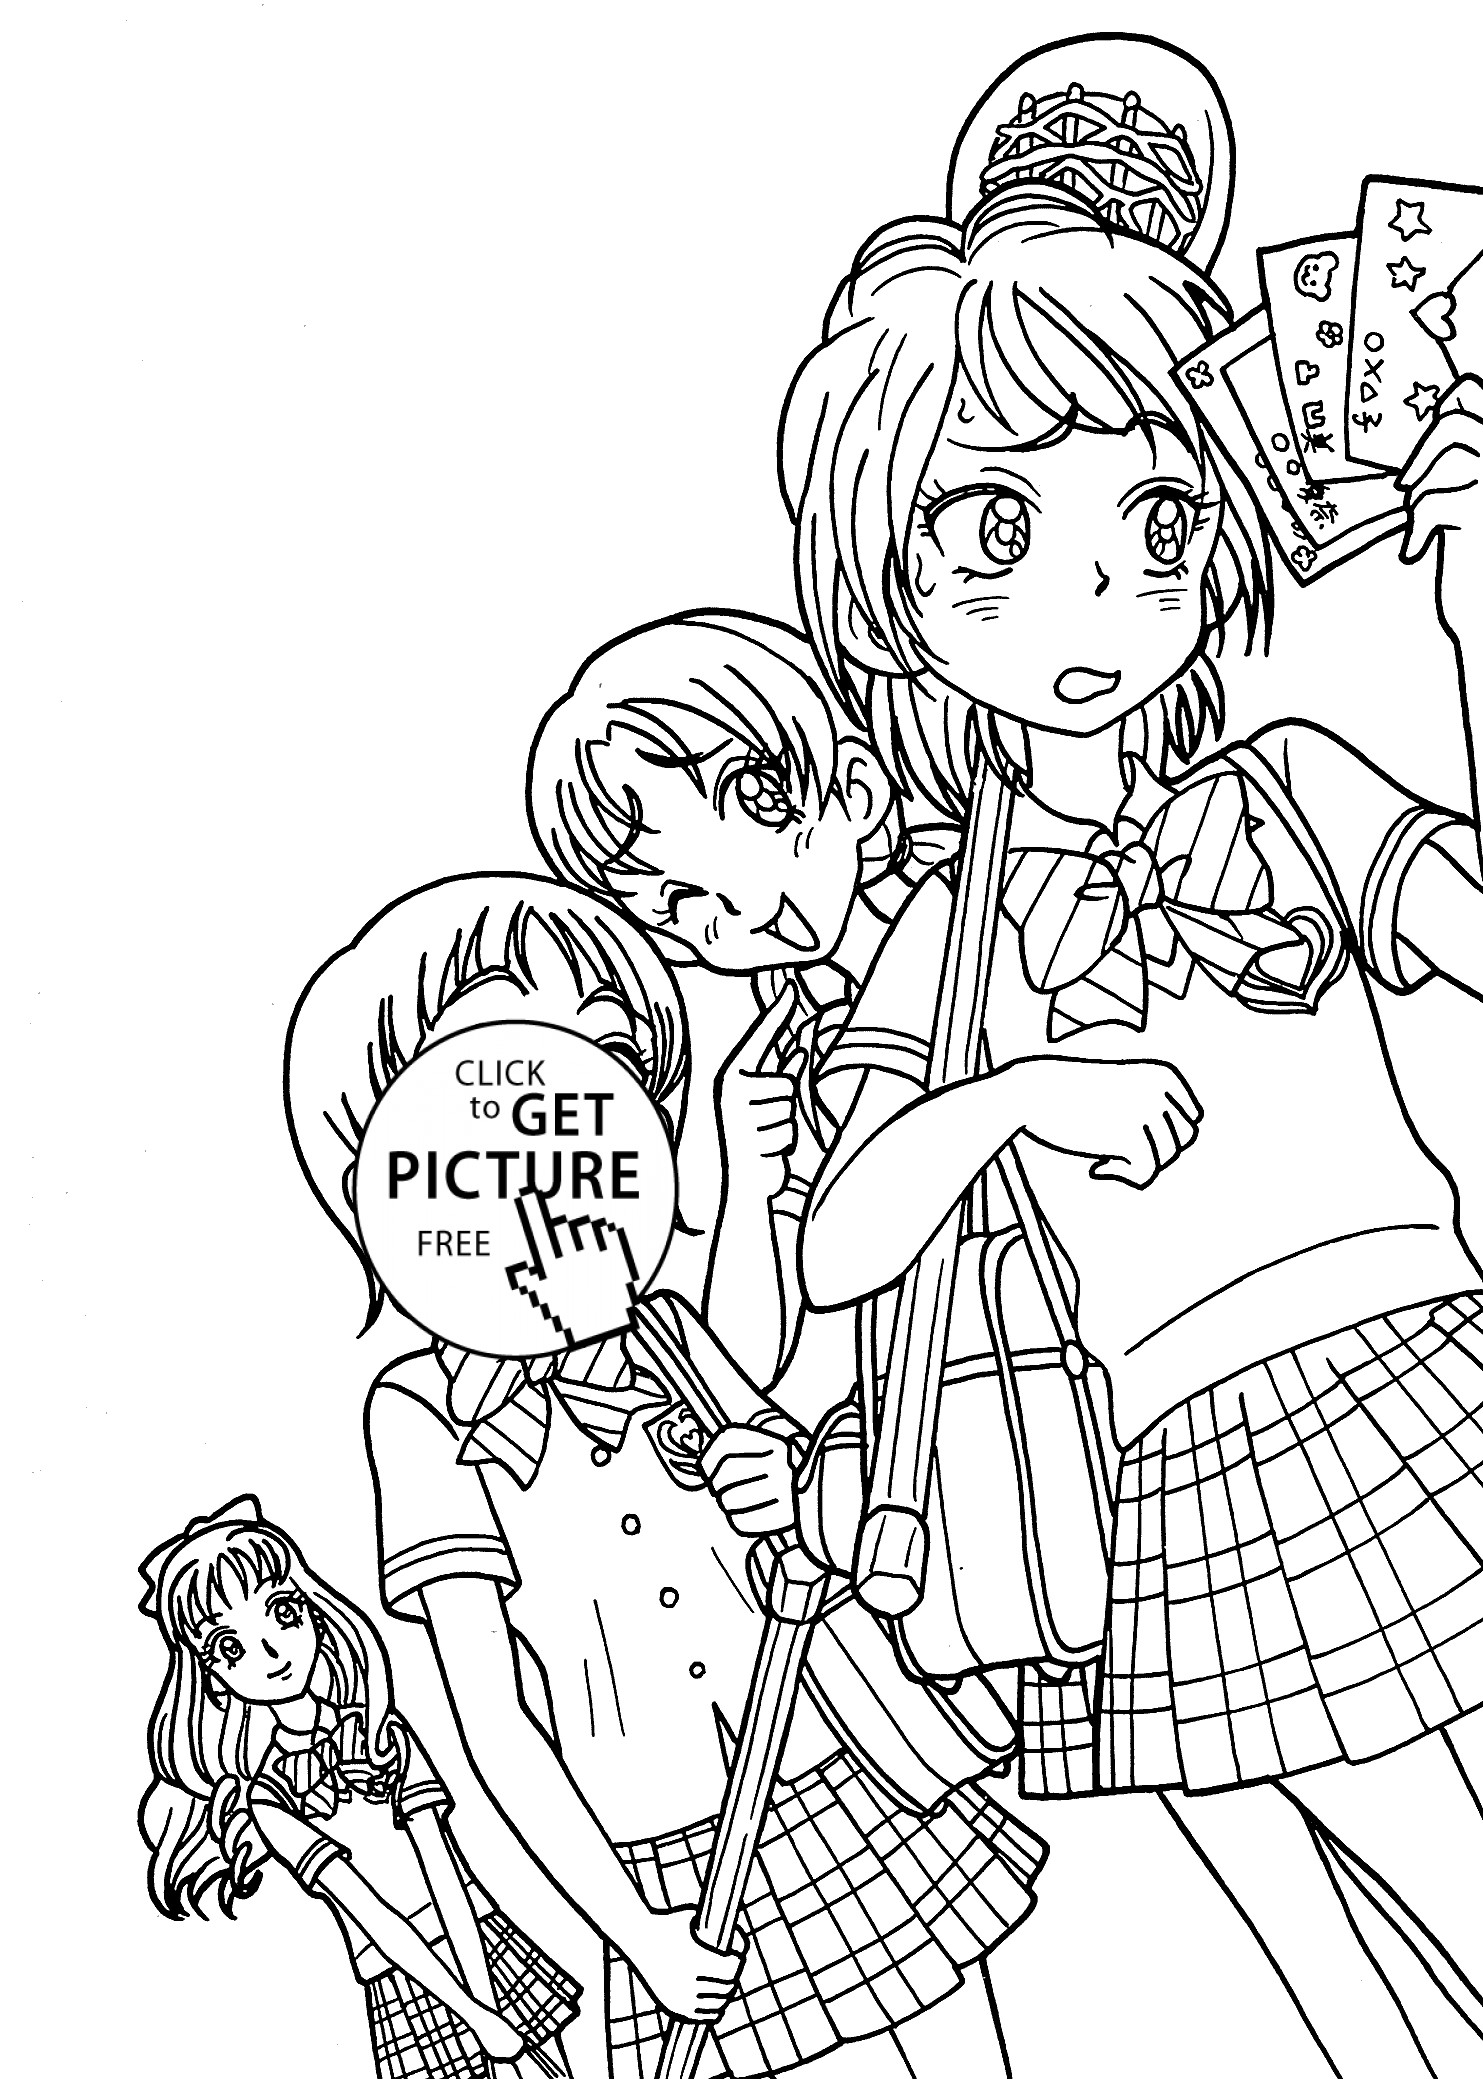 Coloring Pages For Girls Anime
 Girls from Pretty cure anime coloring pages for kids